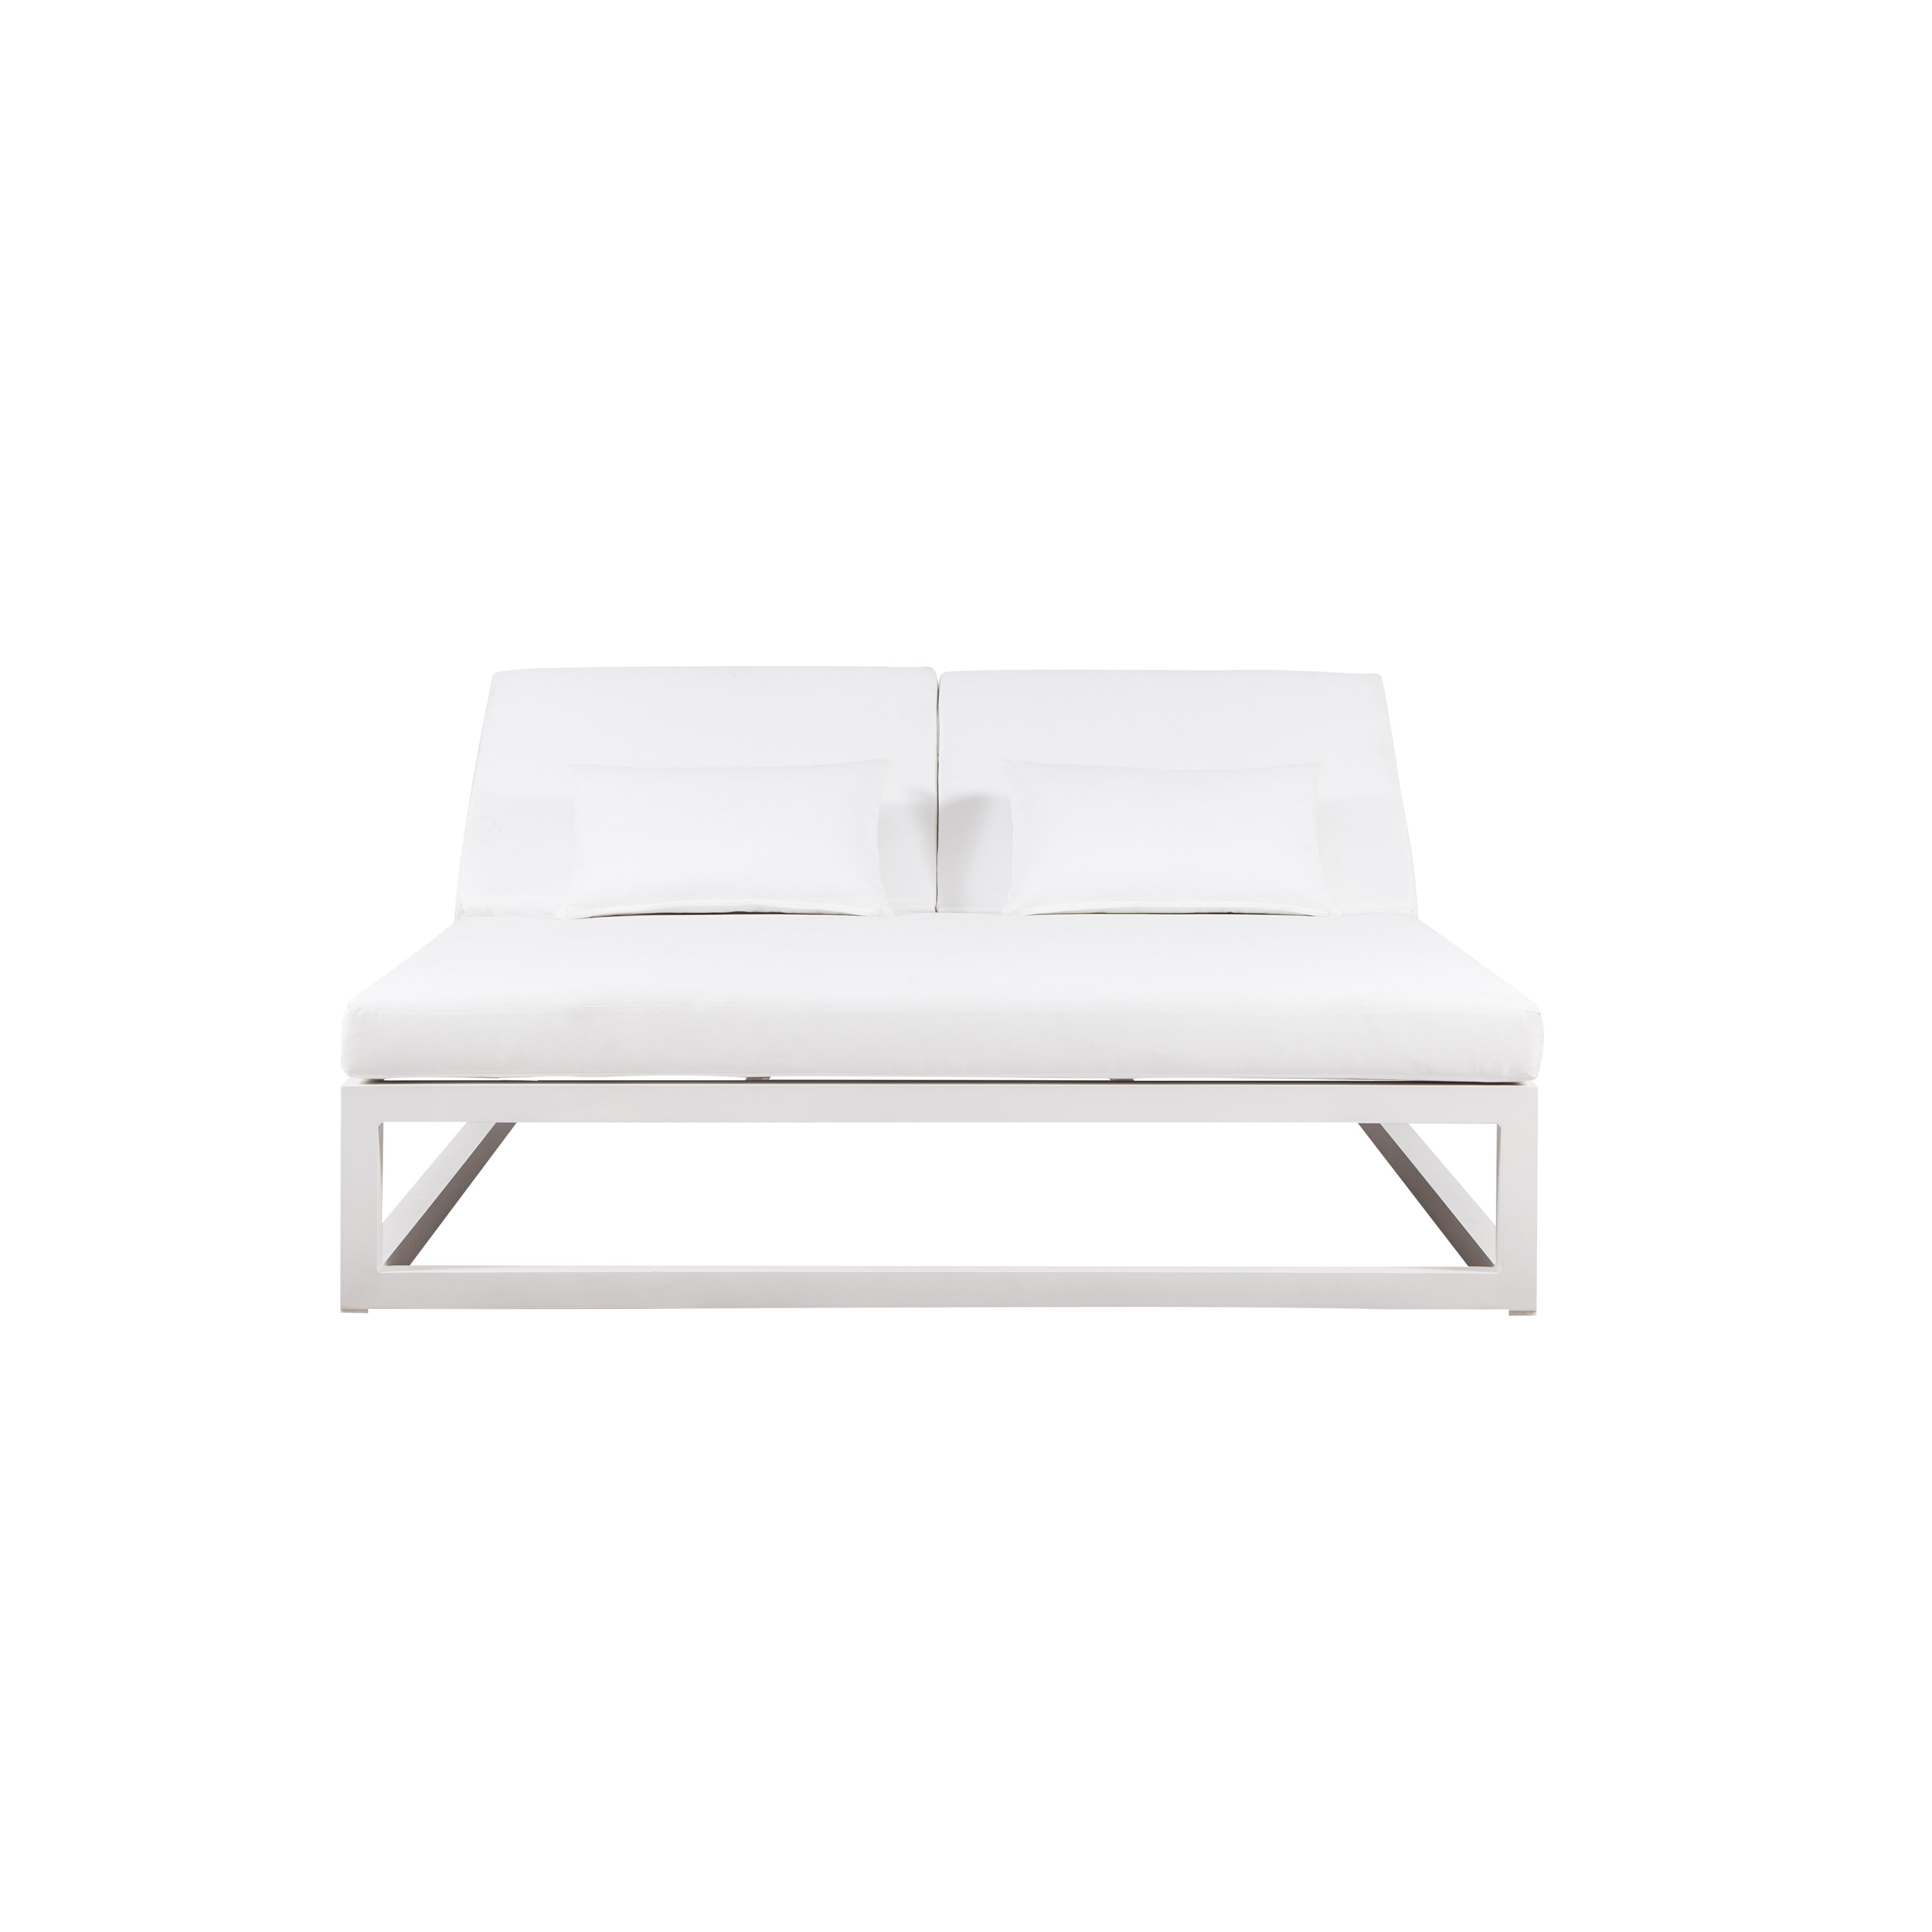 Xita alu.double daybed S6